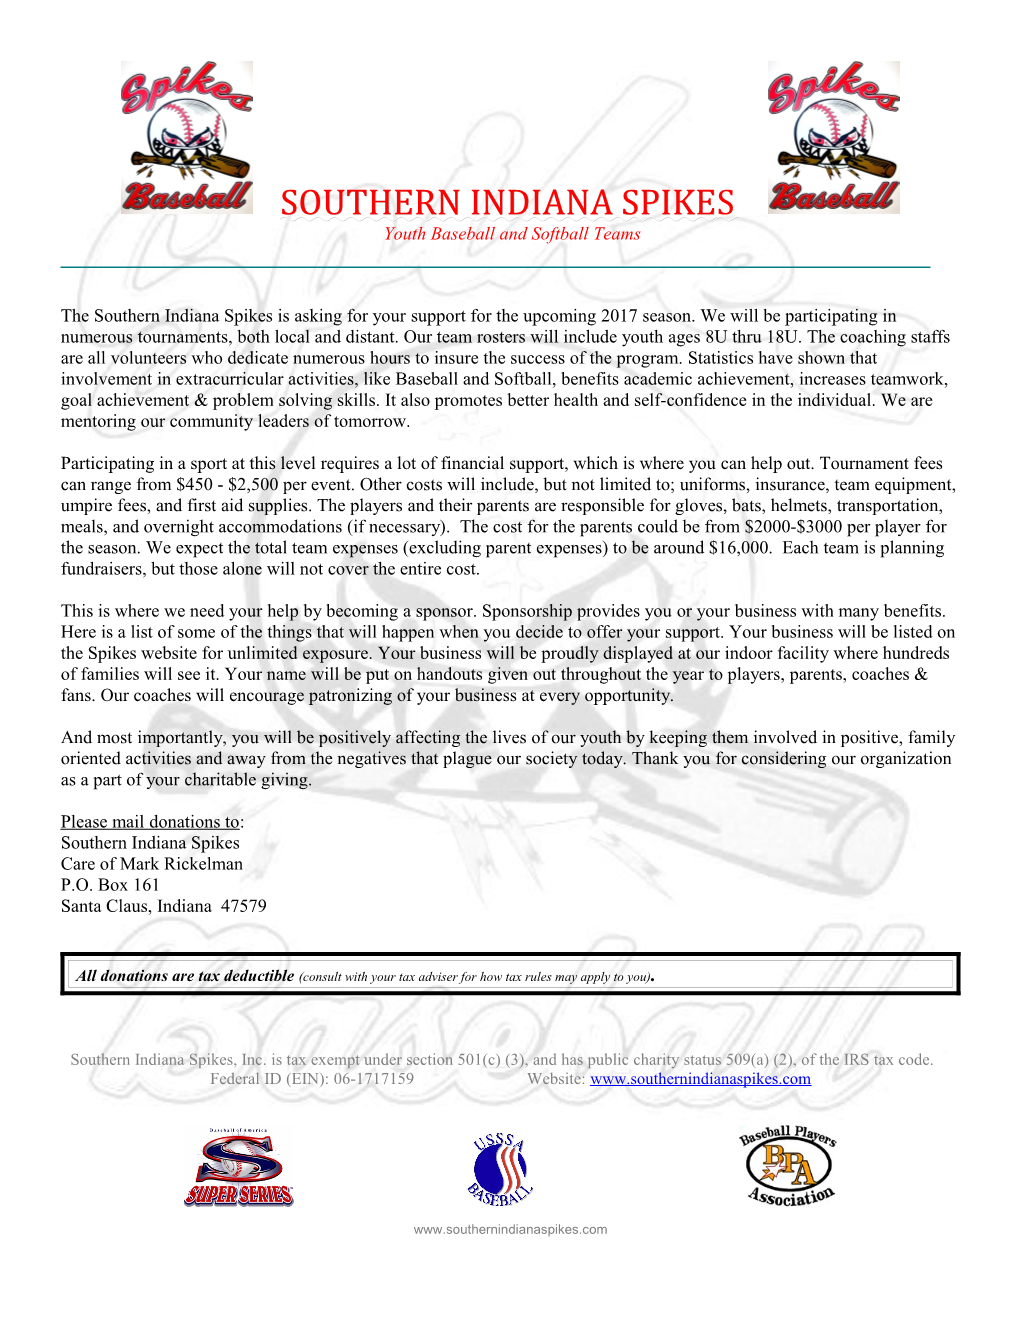 Southern Indiana Spikes Letterhead 2006